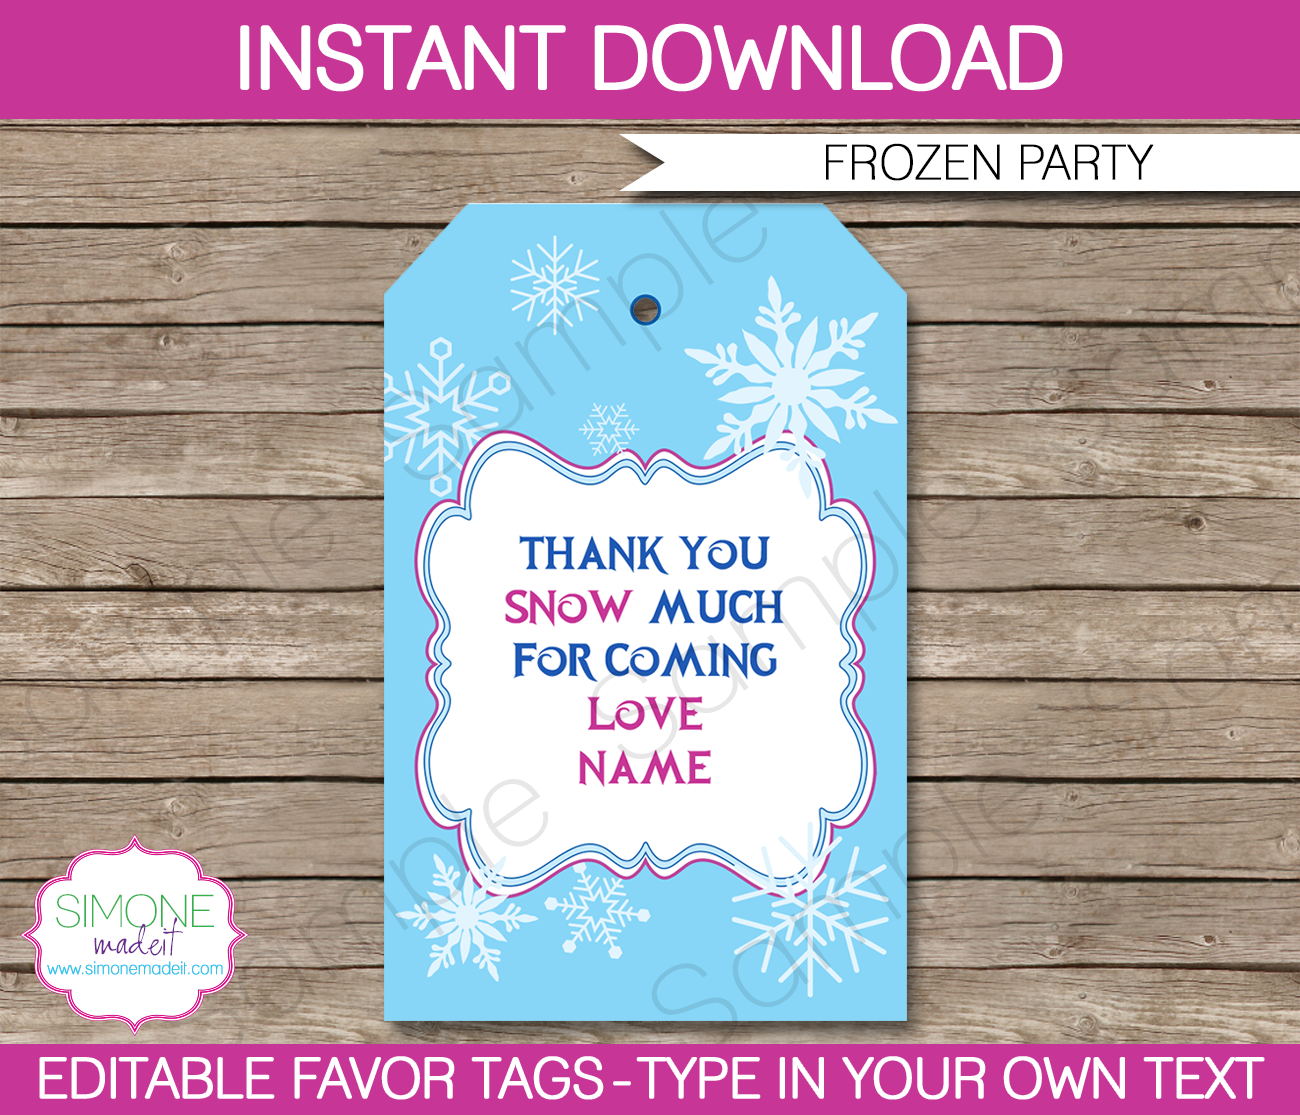 frozen-party-favor-tags-template-thank-you-tags-editable